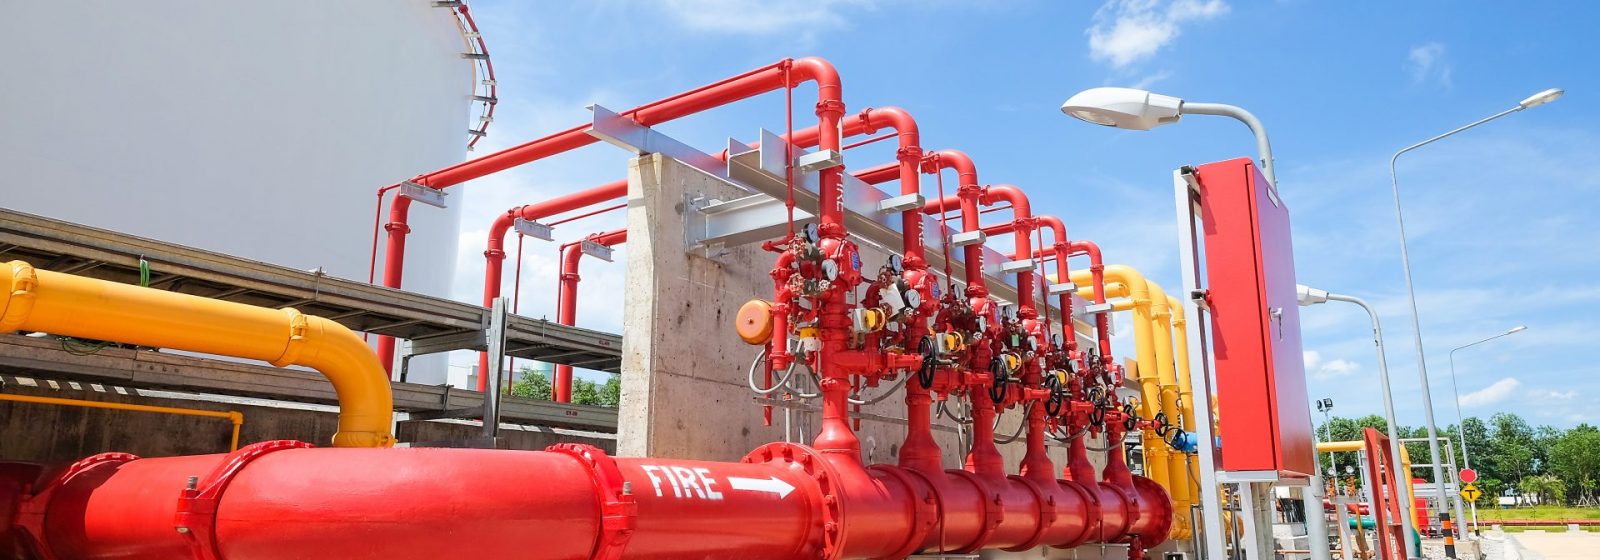 Crude Tank Firefighting Systems Designs Project - Header Image